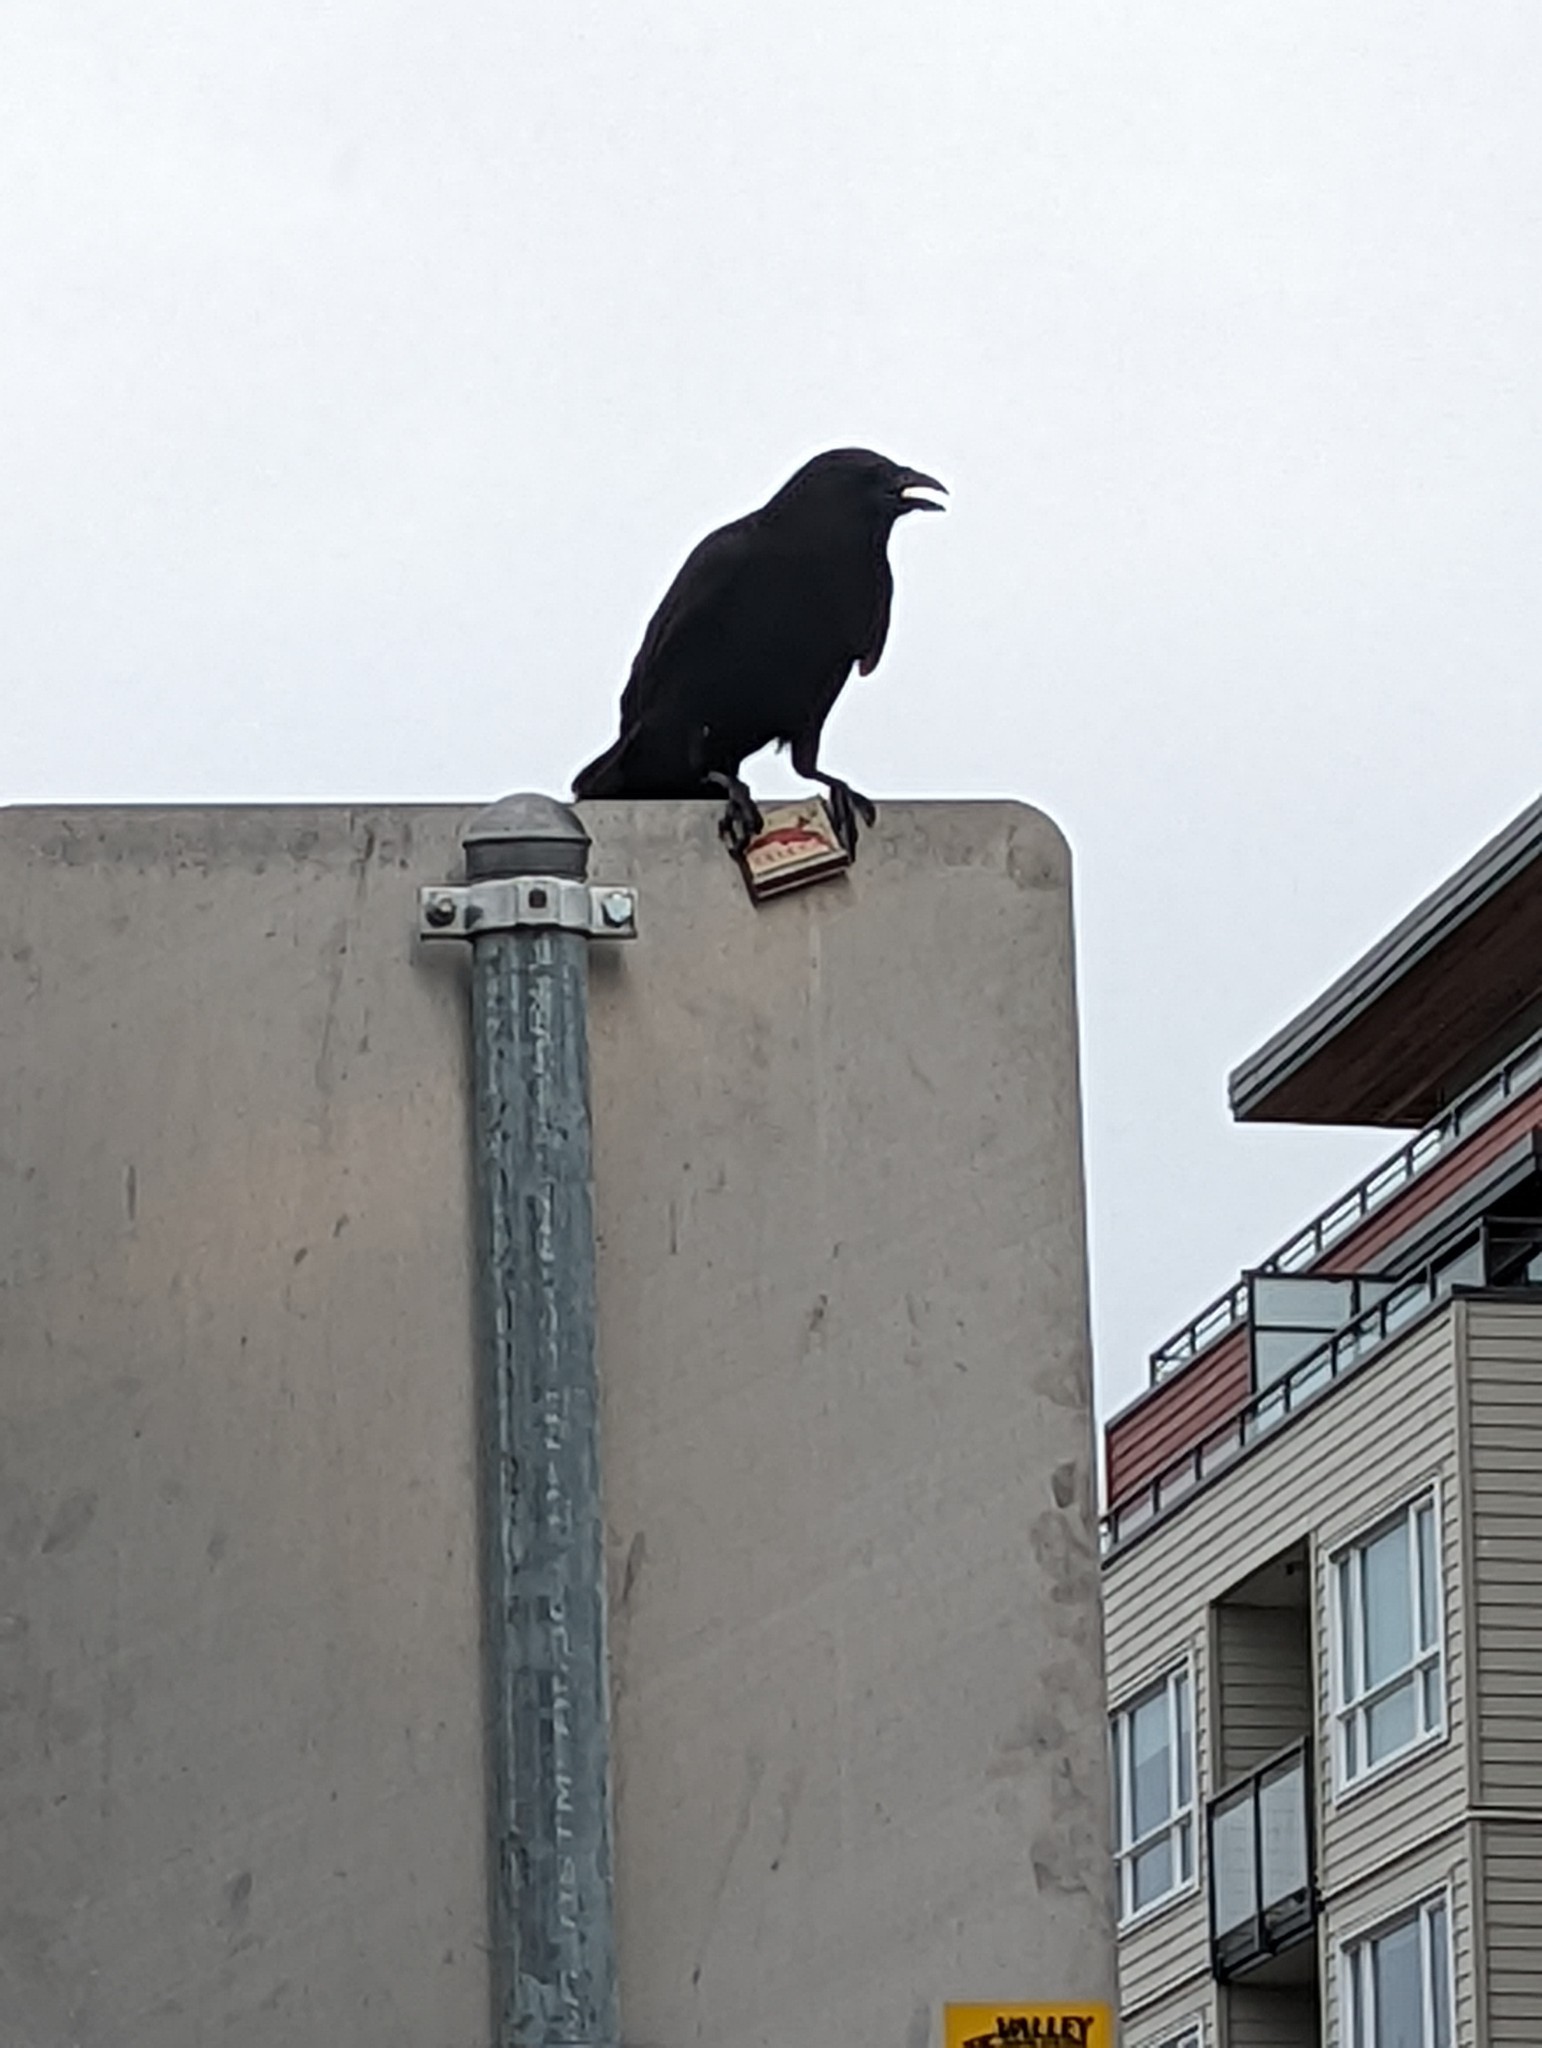 mango-habanero-autism-deactivat:This is the best photo I’ve ever taken, I managed to capture one of a crow holding a box of matches. Big trickster energy 